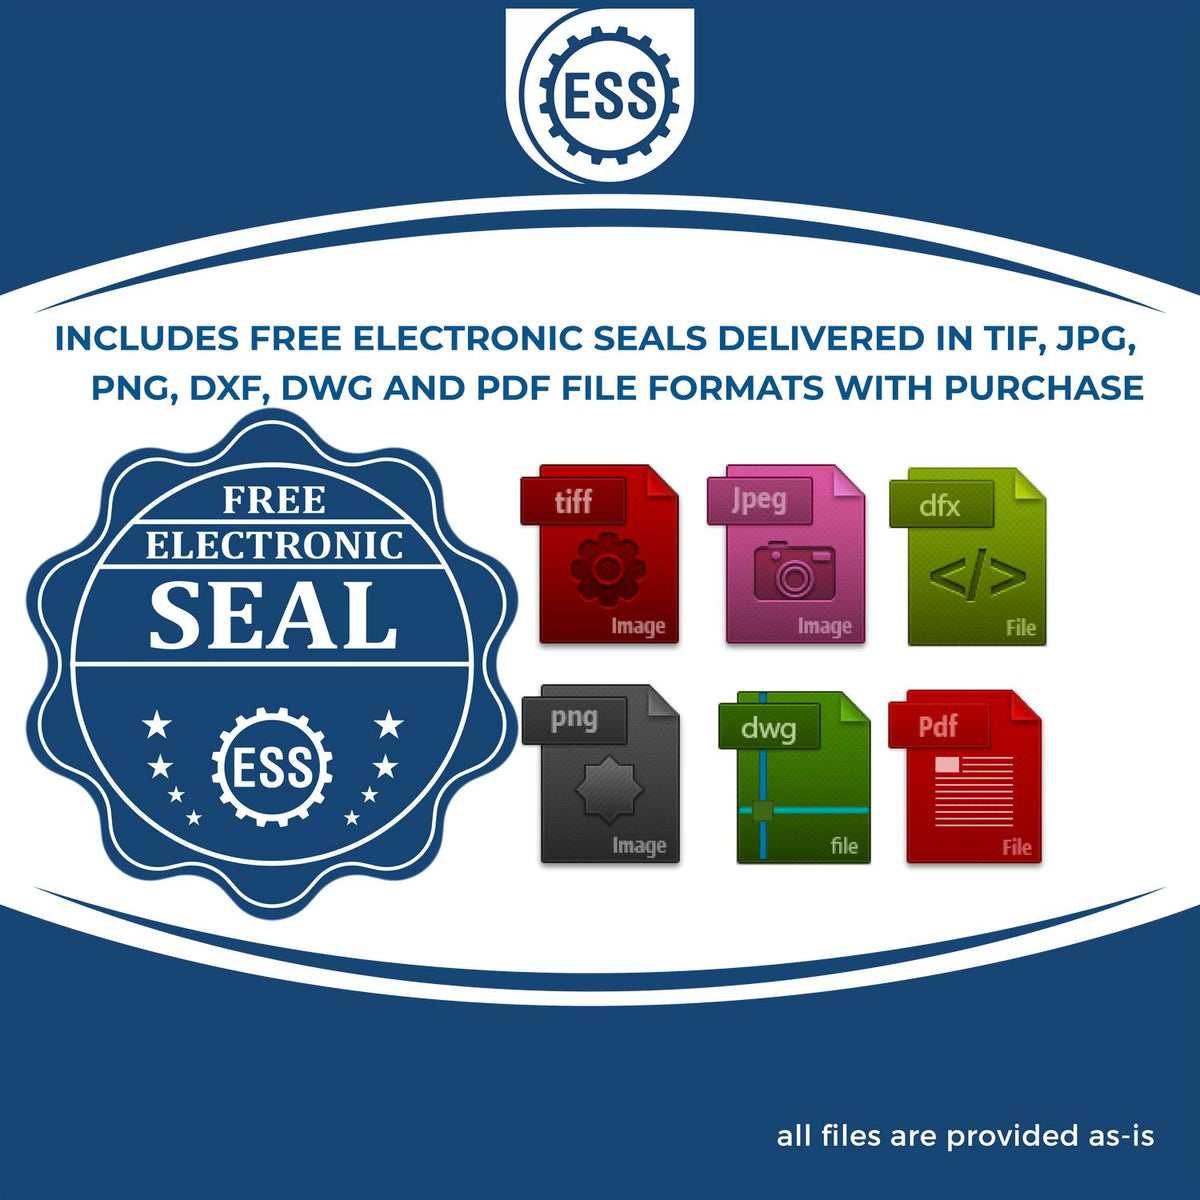 An infographic for the free electronic seal for the Slim Pre-Inked Minnesota Professional Geologist Seal Stamp illustrating the different file type icons such as DXF, DWG, TIF, JPG and PNG.